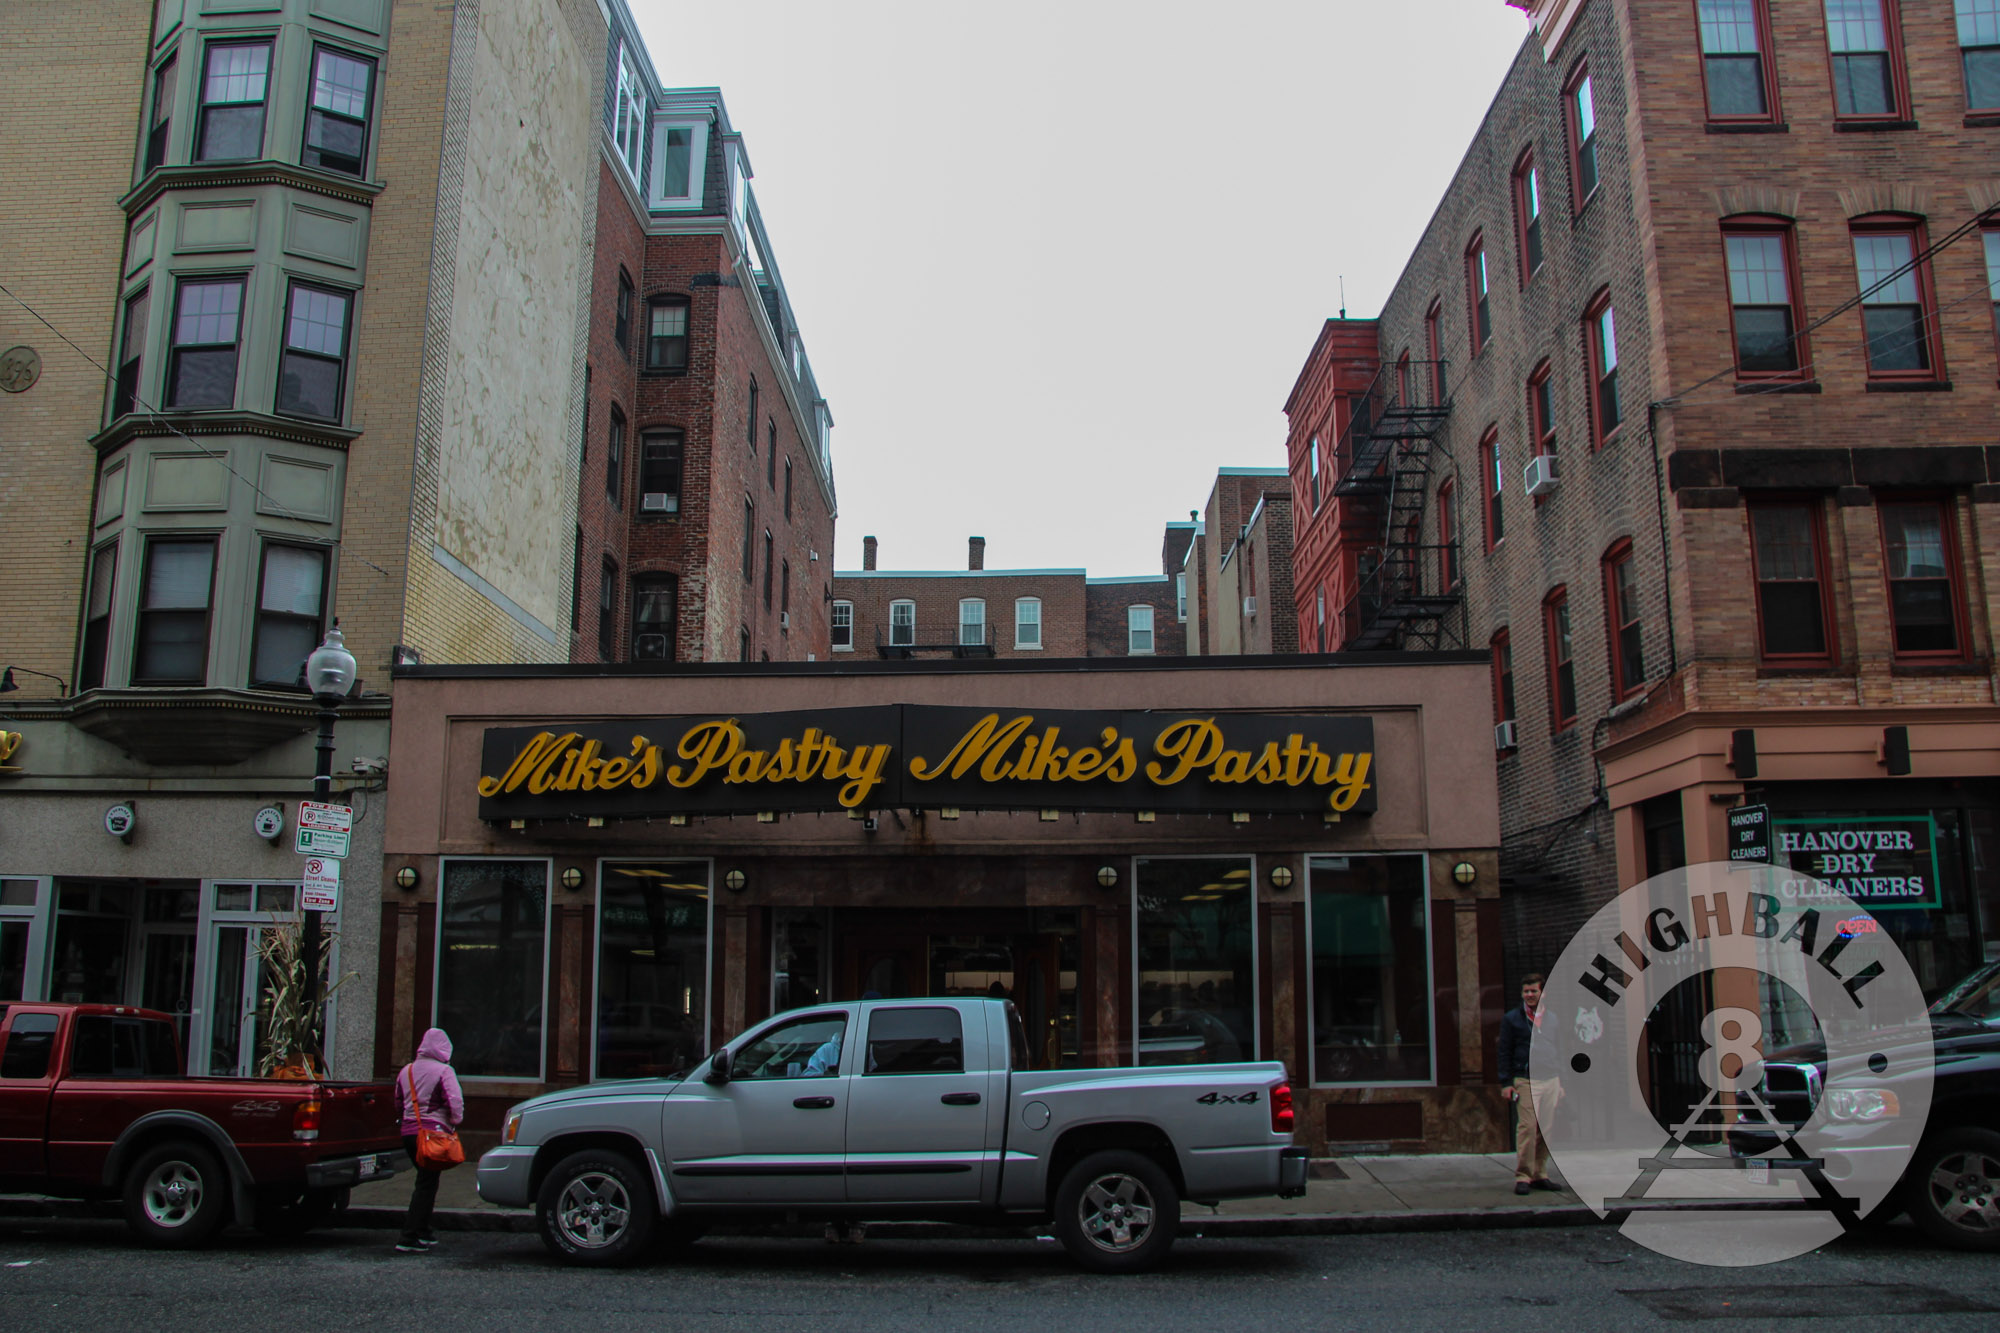 Mike's Pastry in the North End, Boston, Massachusetts, USA, 2014.